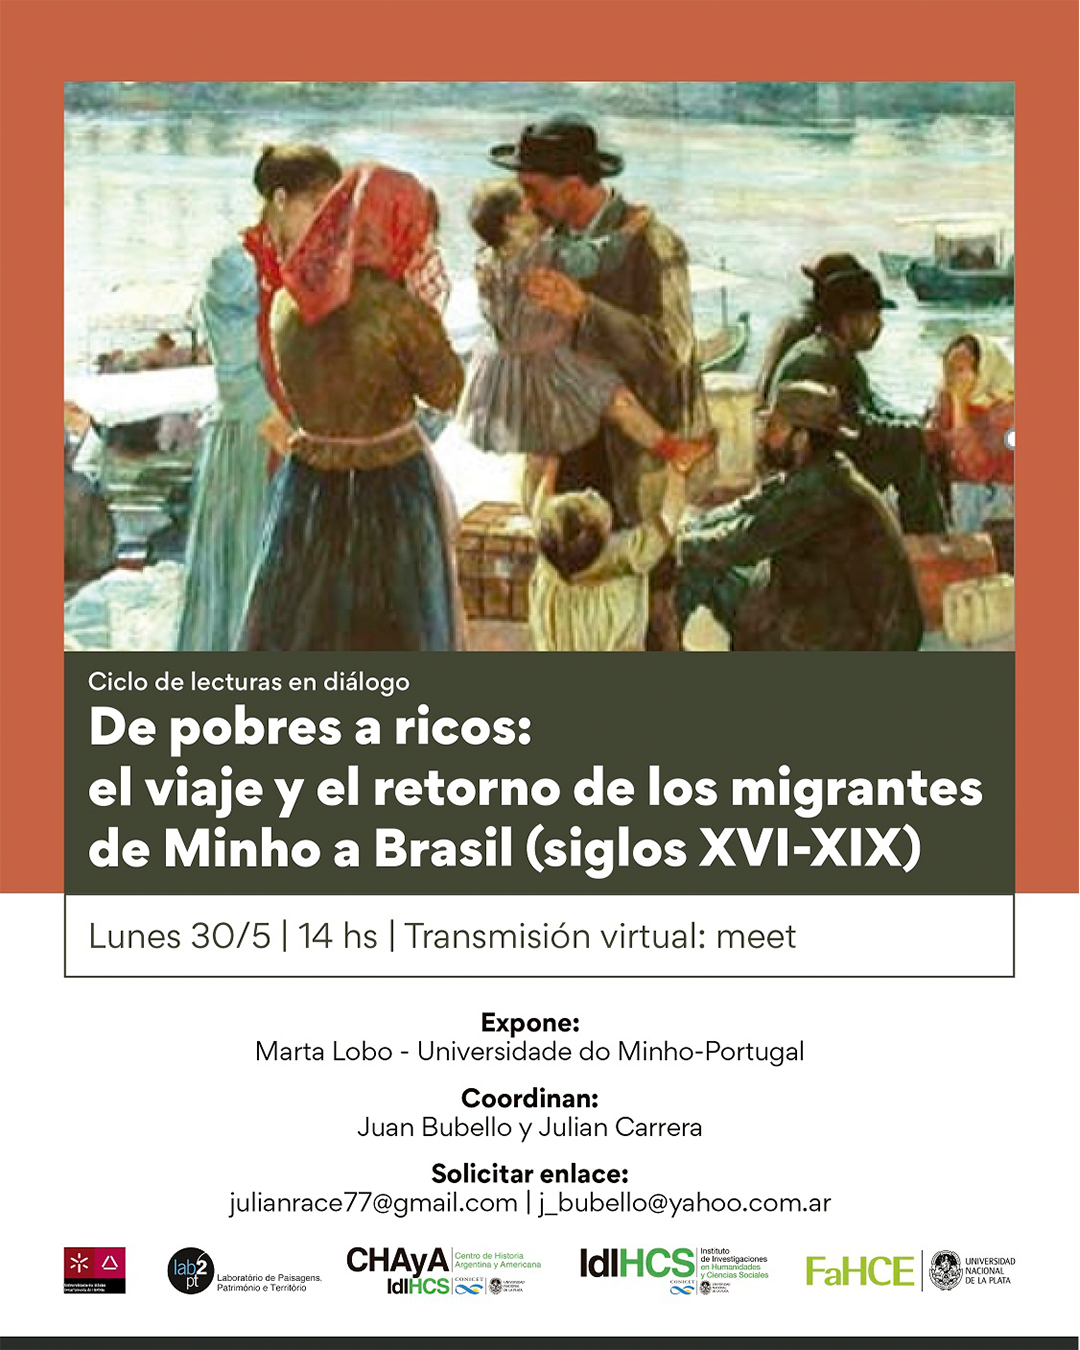 Cycle of lectures in dialogue "From the poor to the rich: the journey and the return of migrants from Minho to Brasil (centuries 16th-19th)" image